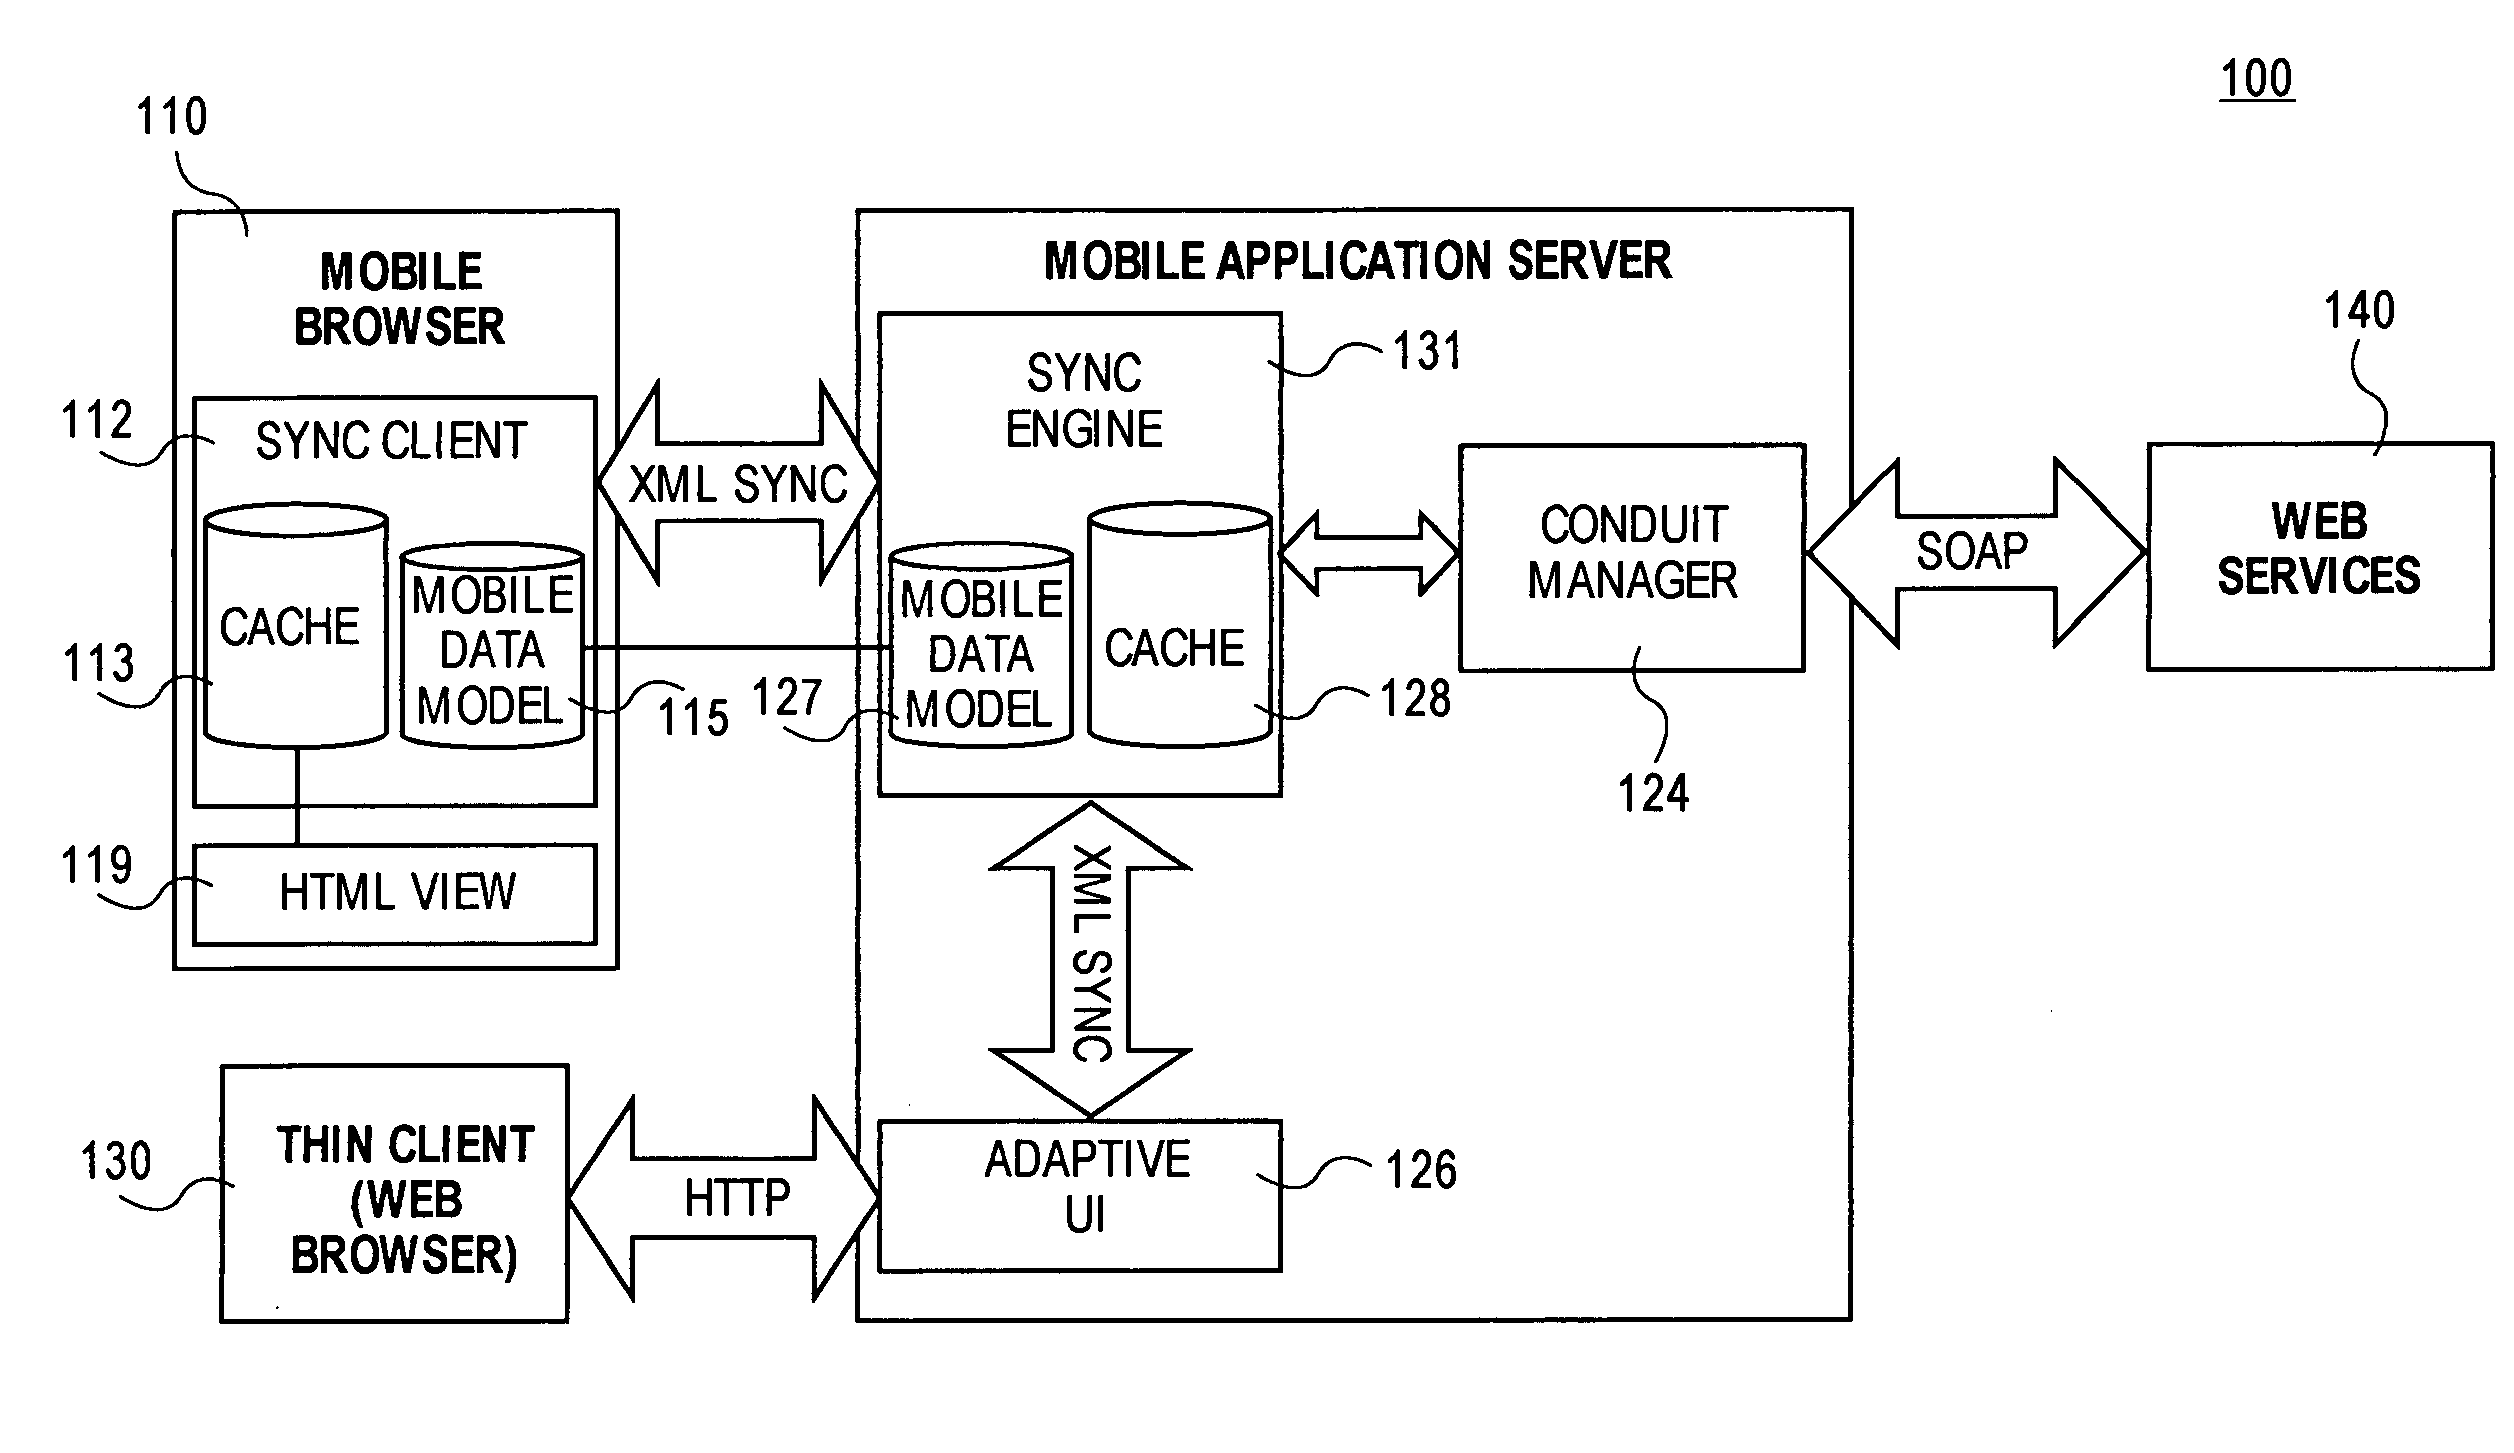 Occasionally-connected application server